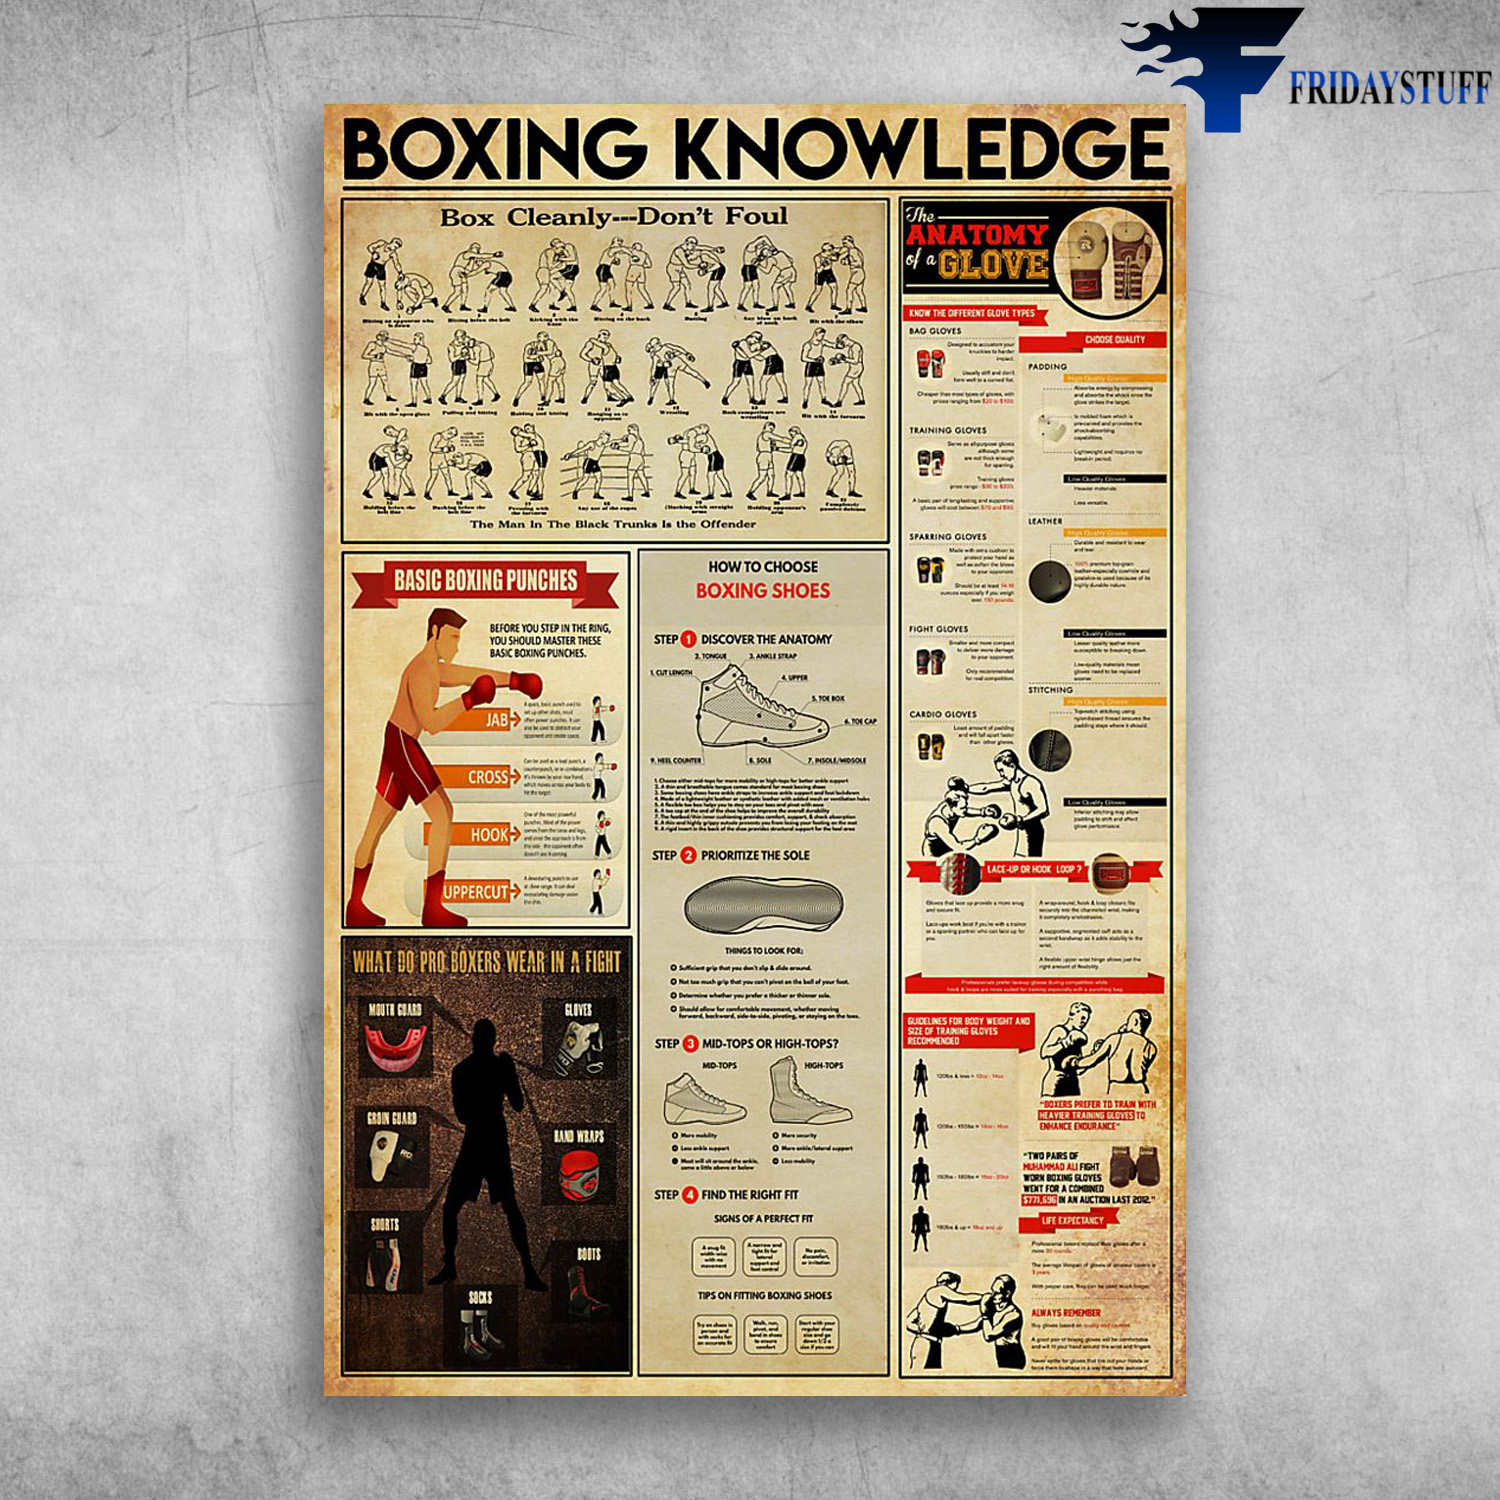 Boxing Knowledge - Box Cleanly, Don't Foul, Basic Boxing Punches, How To Choose Boxing Shoes, Anatomy Glove